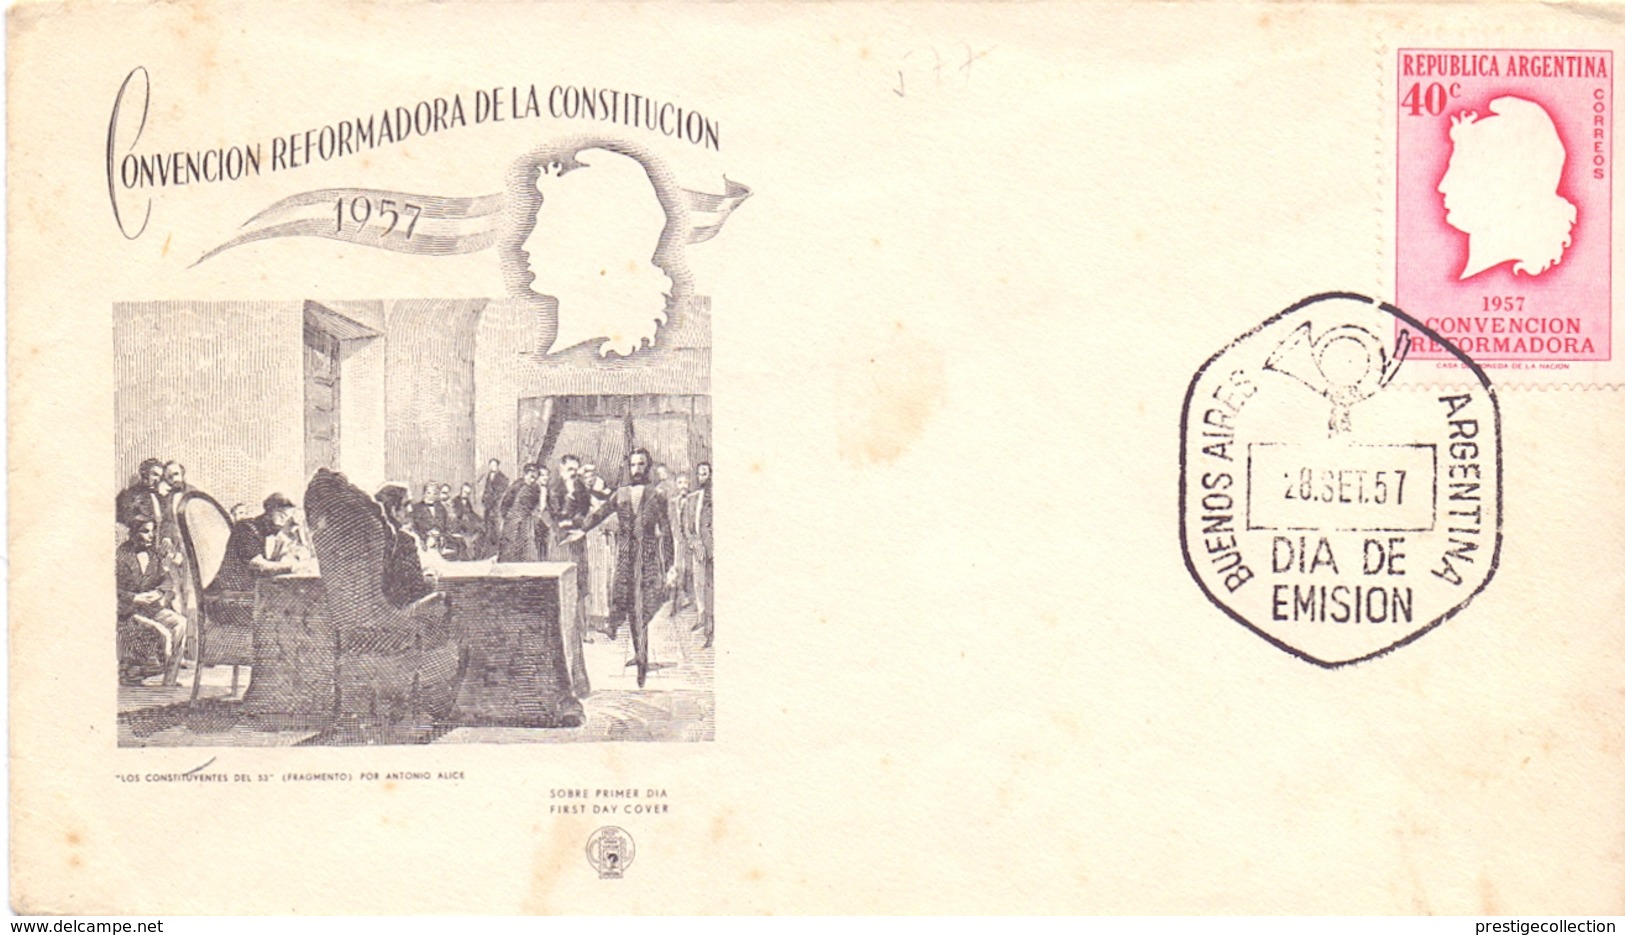 ARGENTINA 1957 REFORM OF THE CONSTITUTION (DICE1800039) - FDC